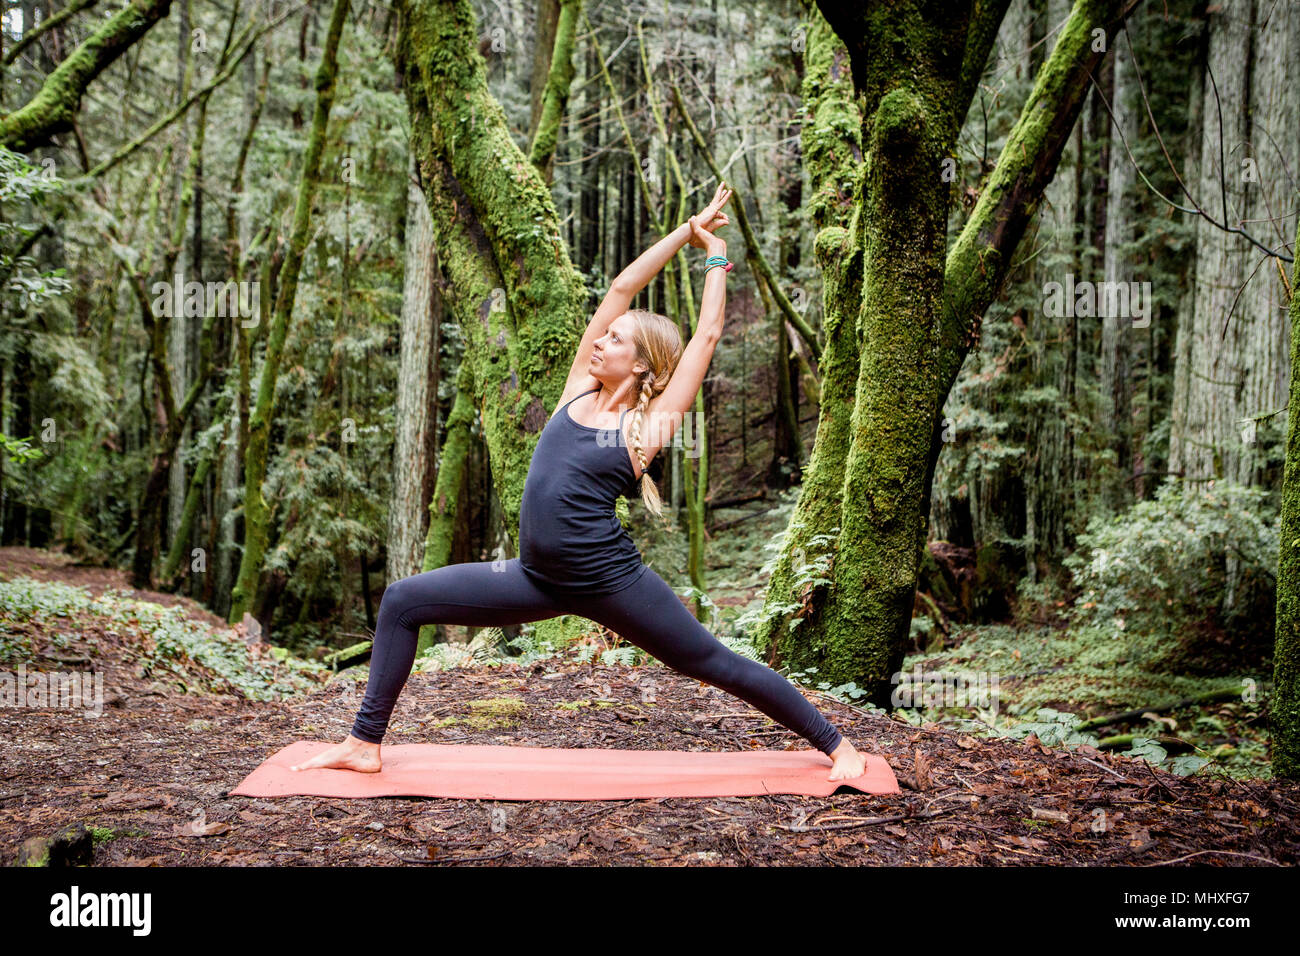 Young woman practicing warrior yoga pose in forest Stock Photo